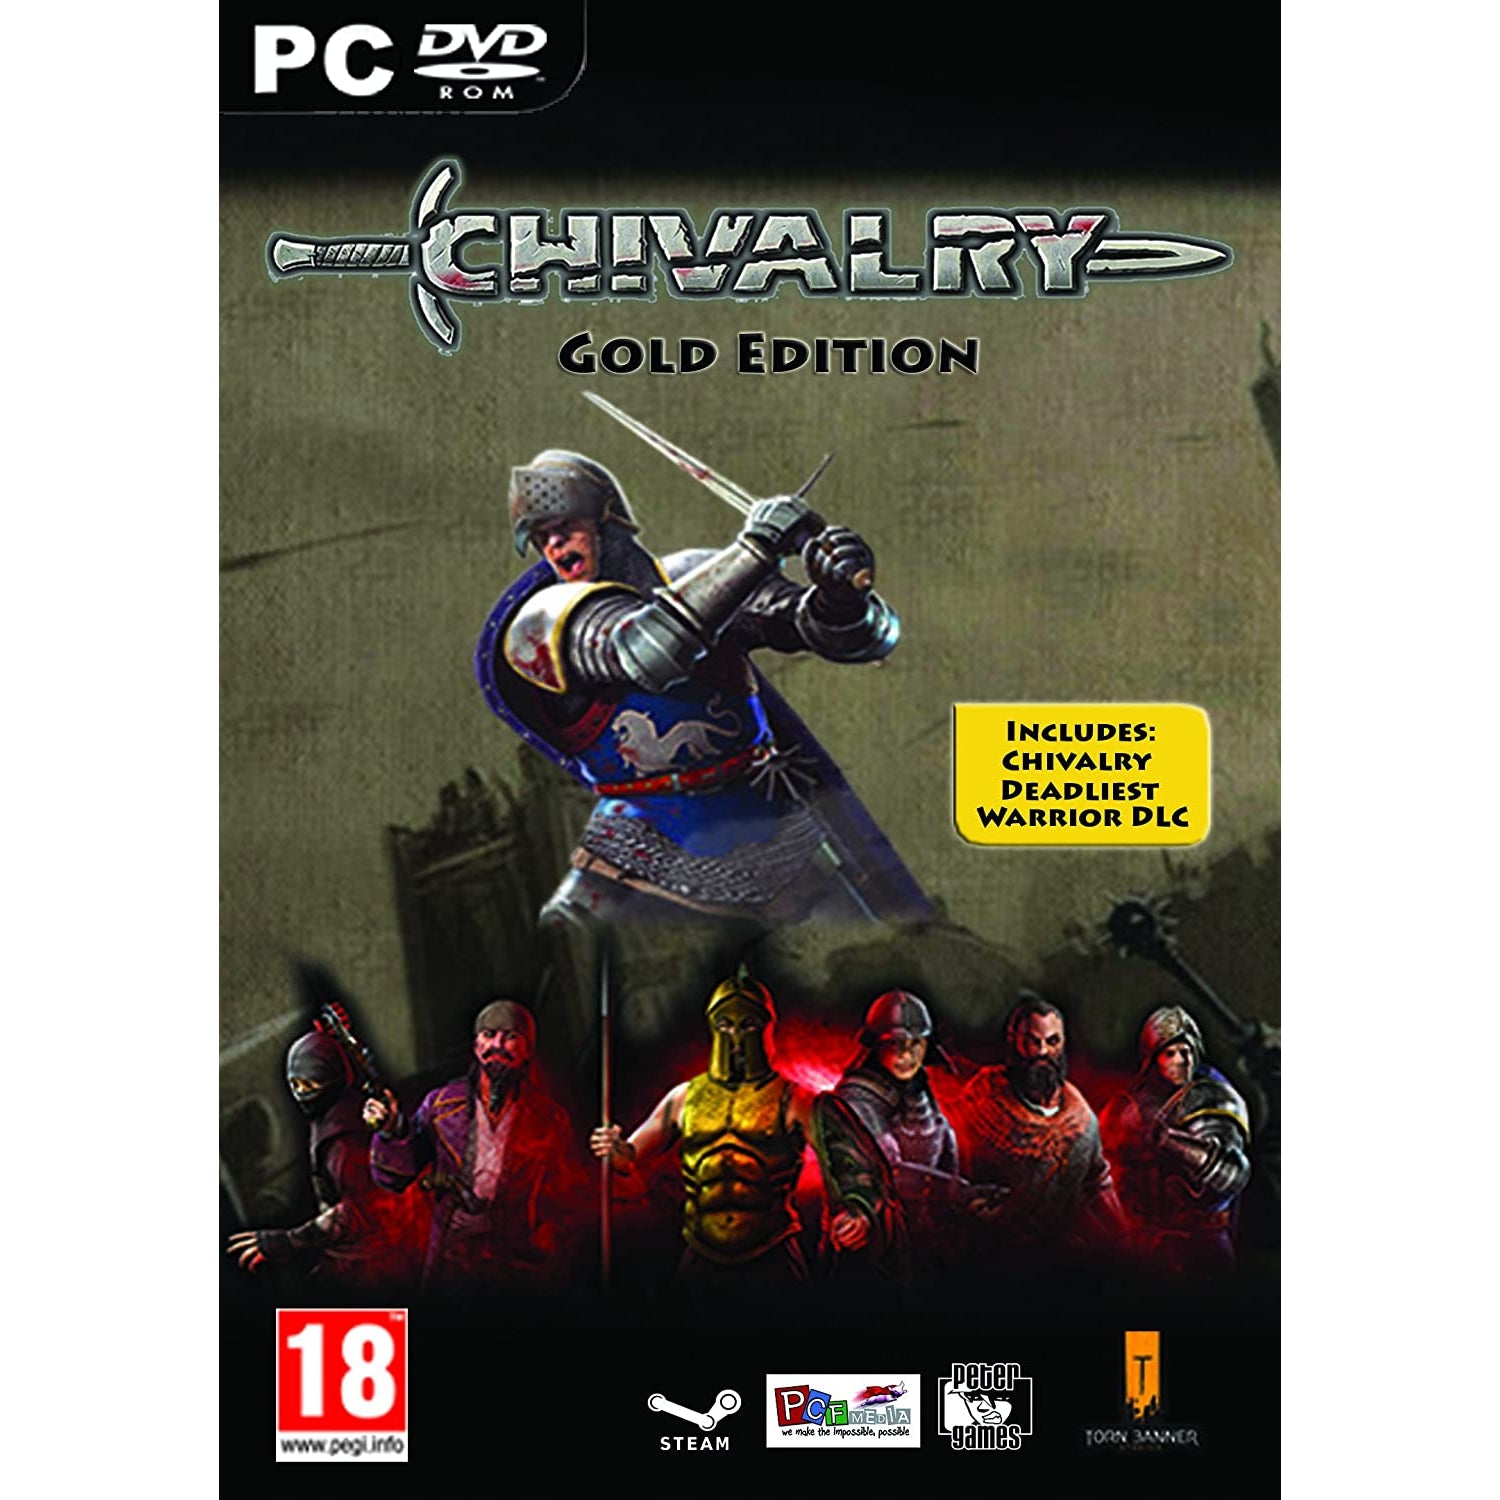 Chivalry Gold Pack (PC DVD)